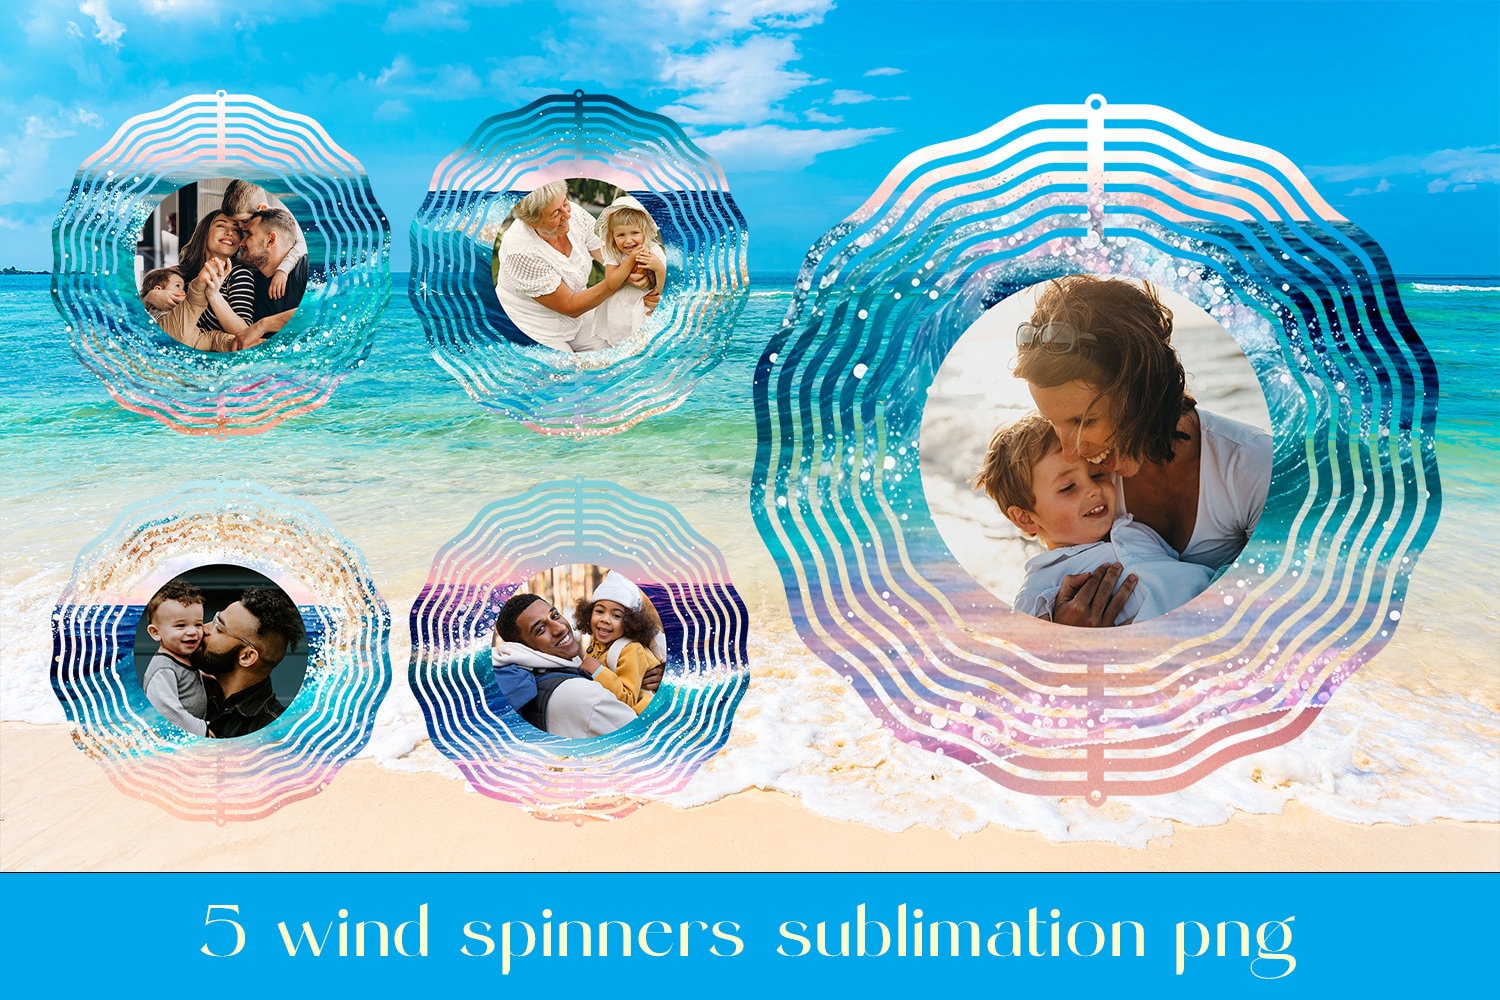 Oval 16 inch wind spinner - Sublimation blanks – My Sublimation Superstore